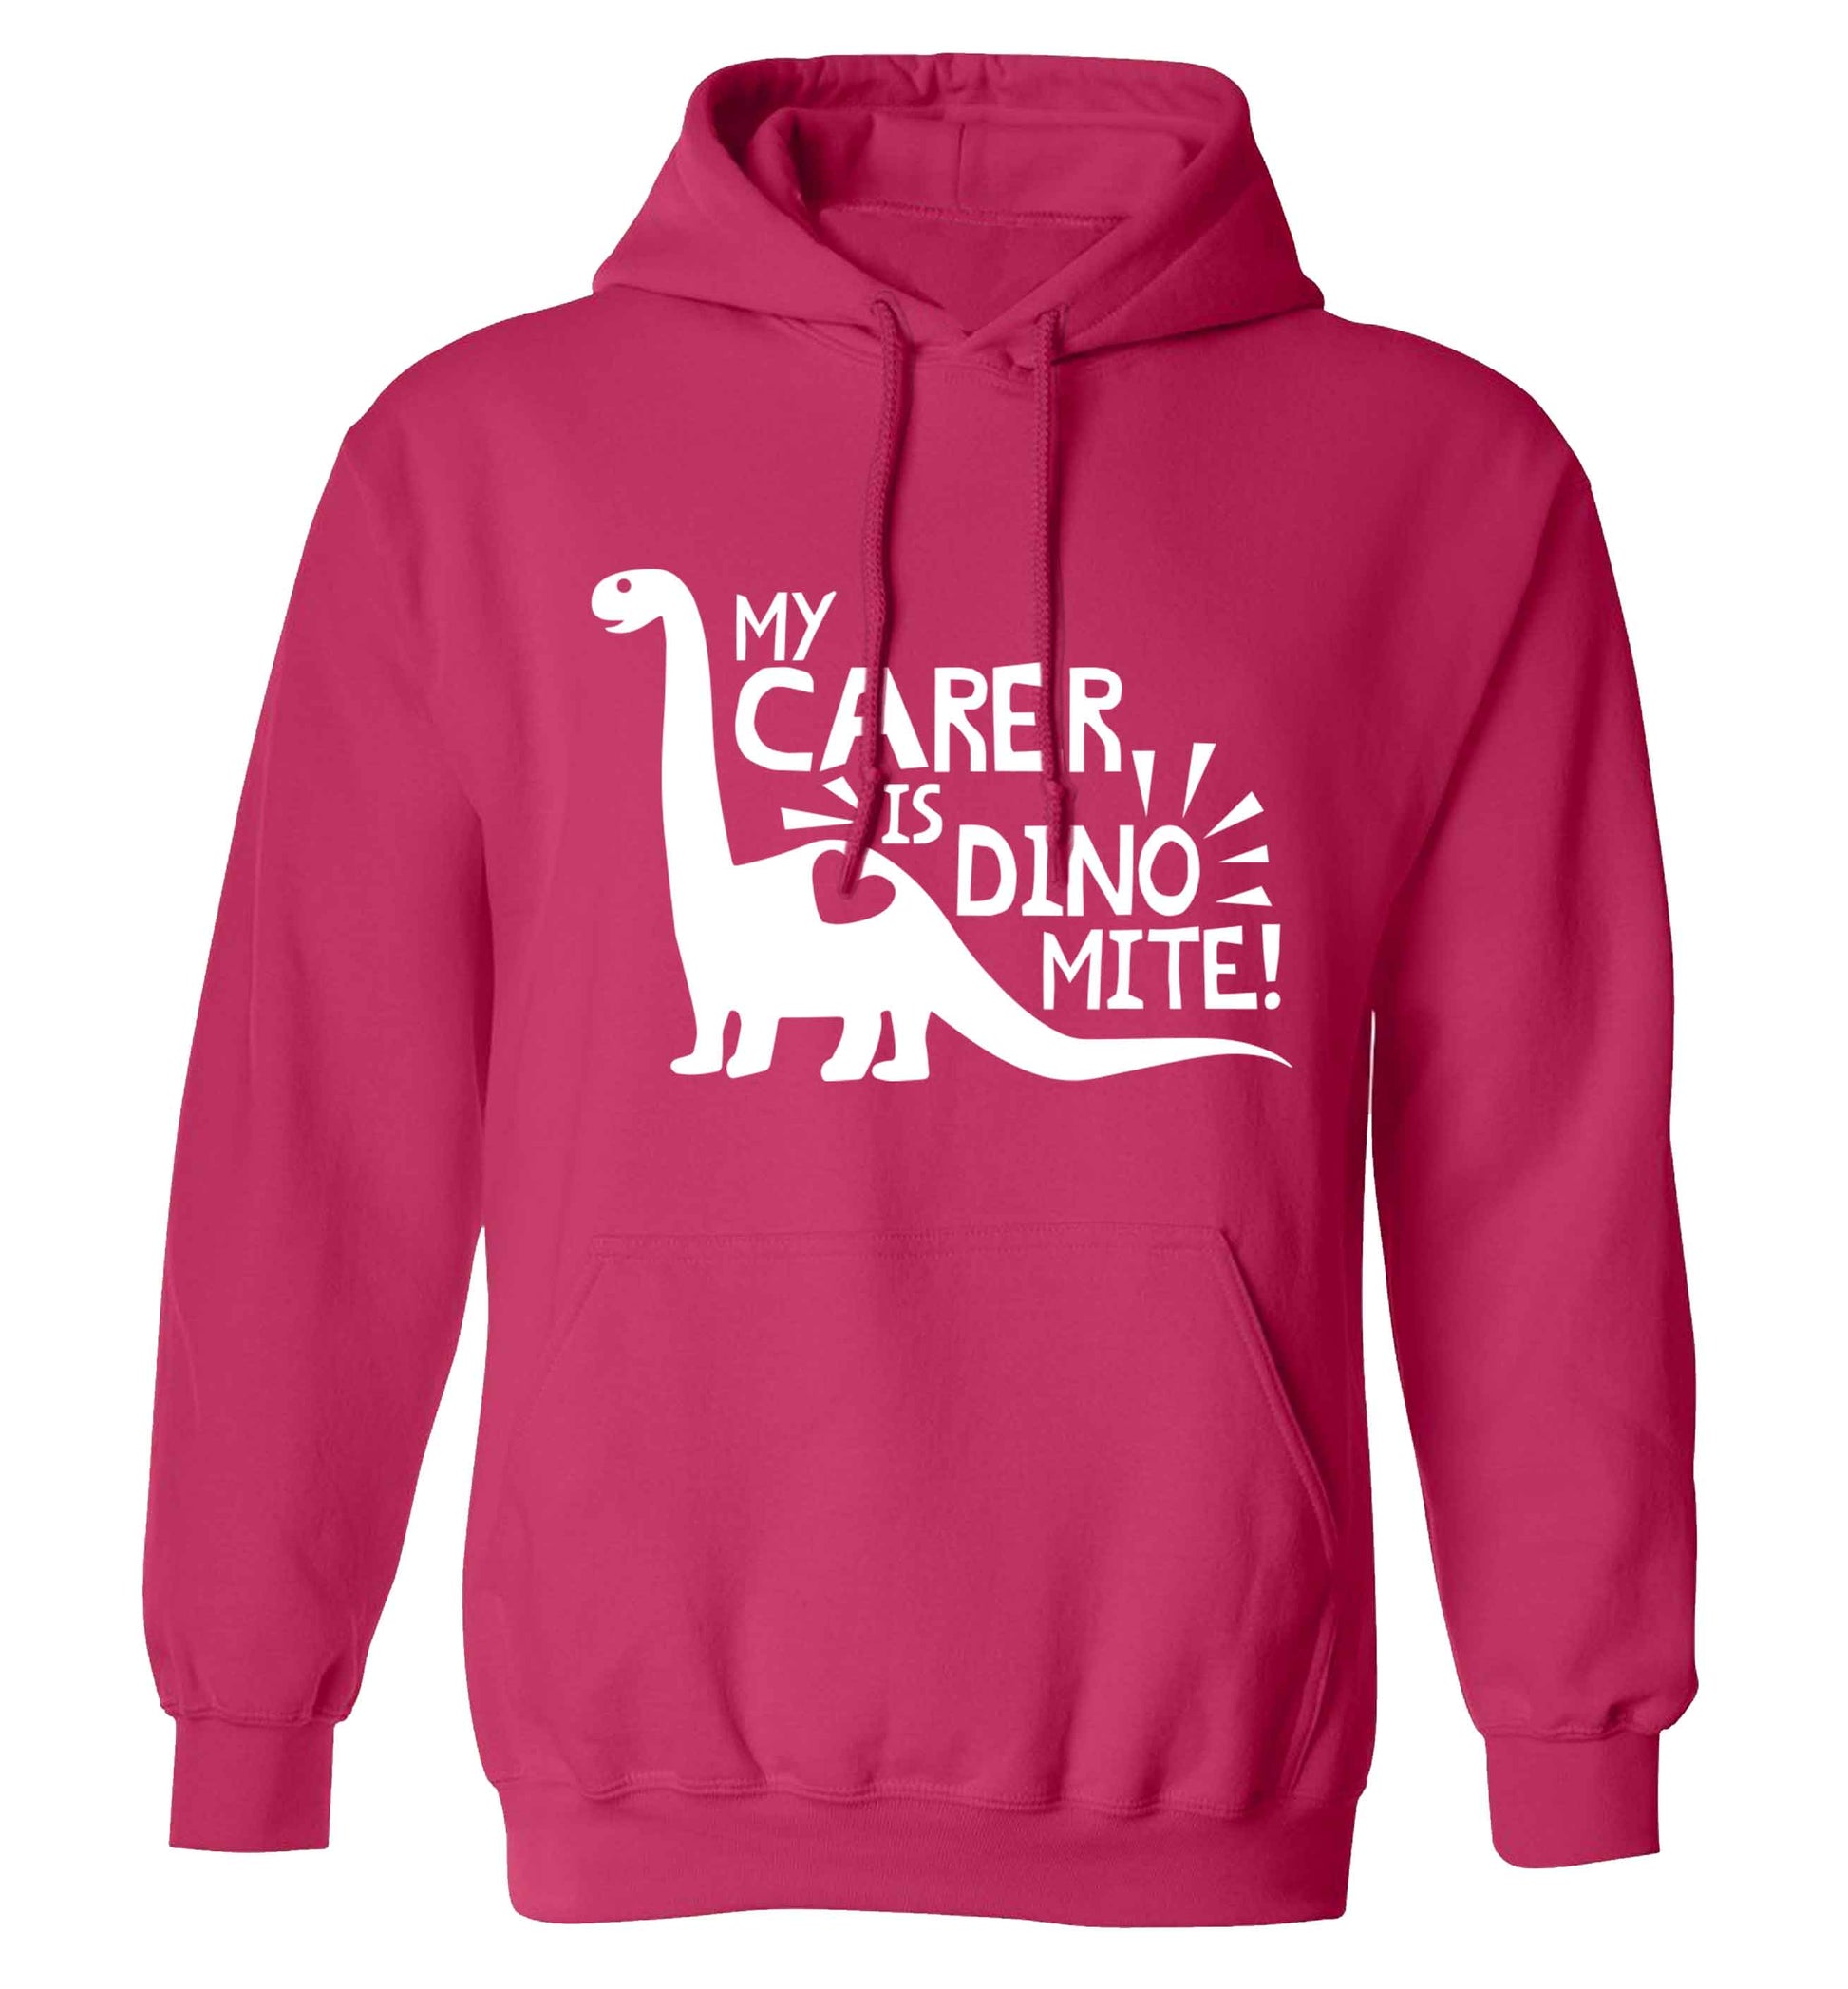 My carer is dinomite! adults unisex pink hoodie 2XL